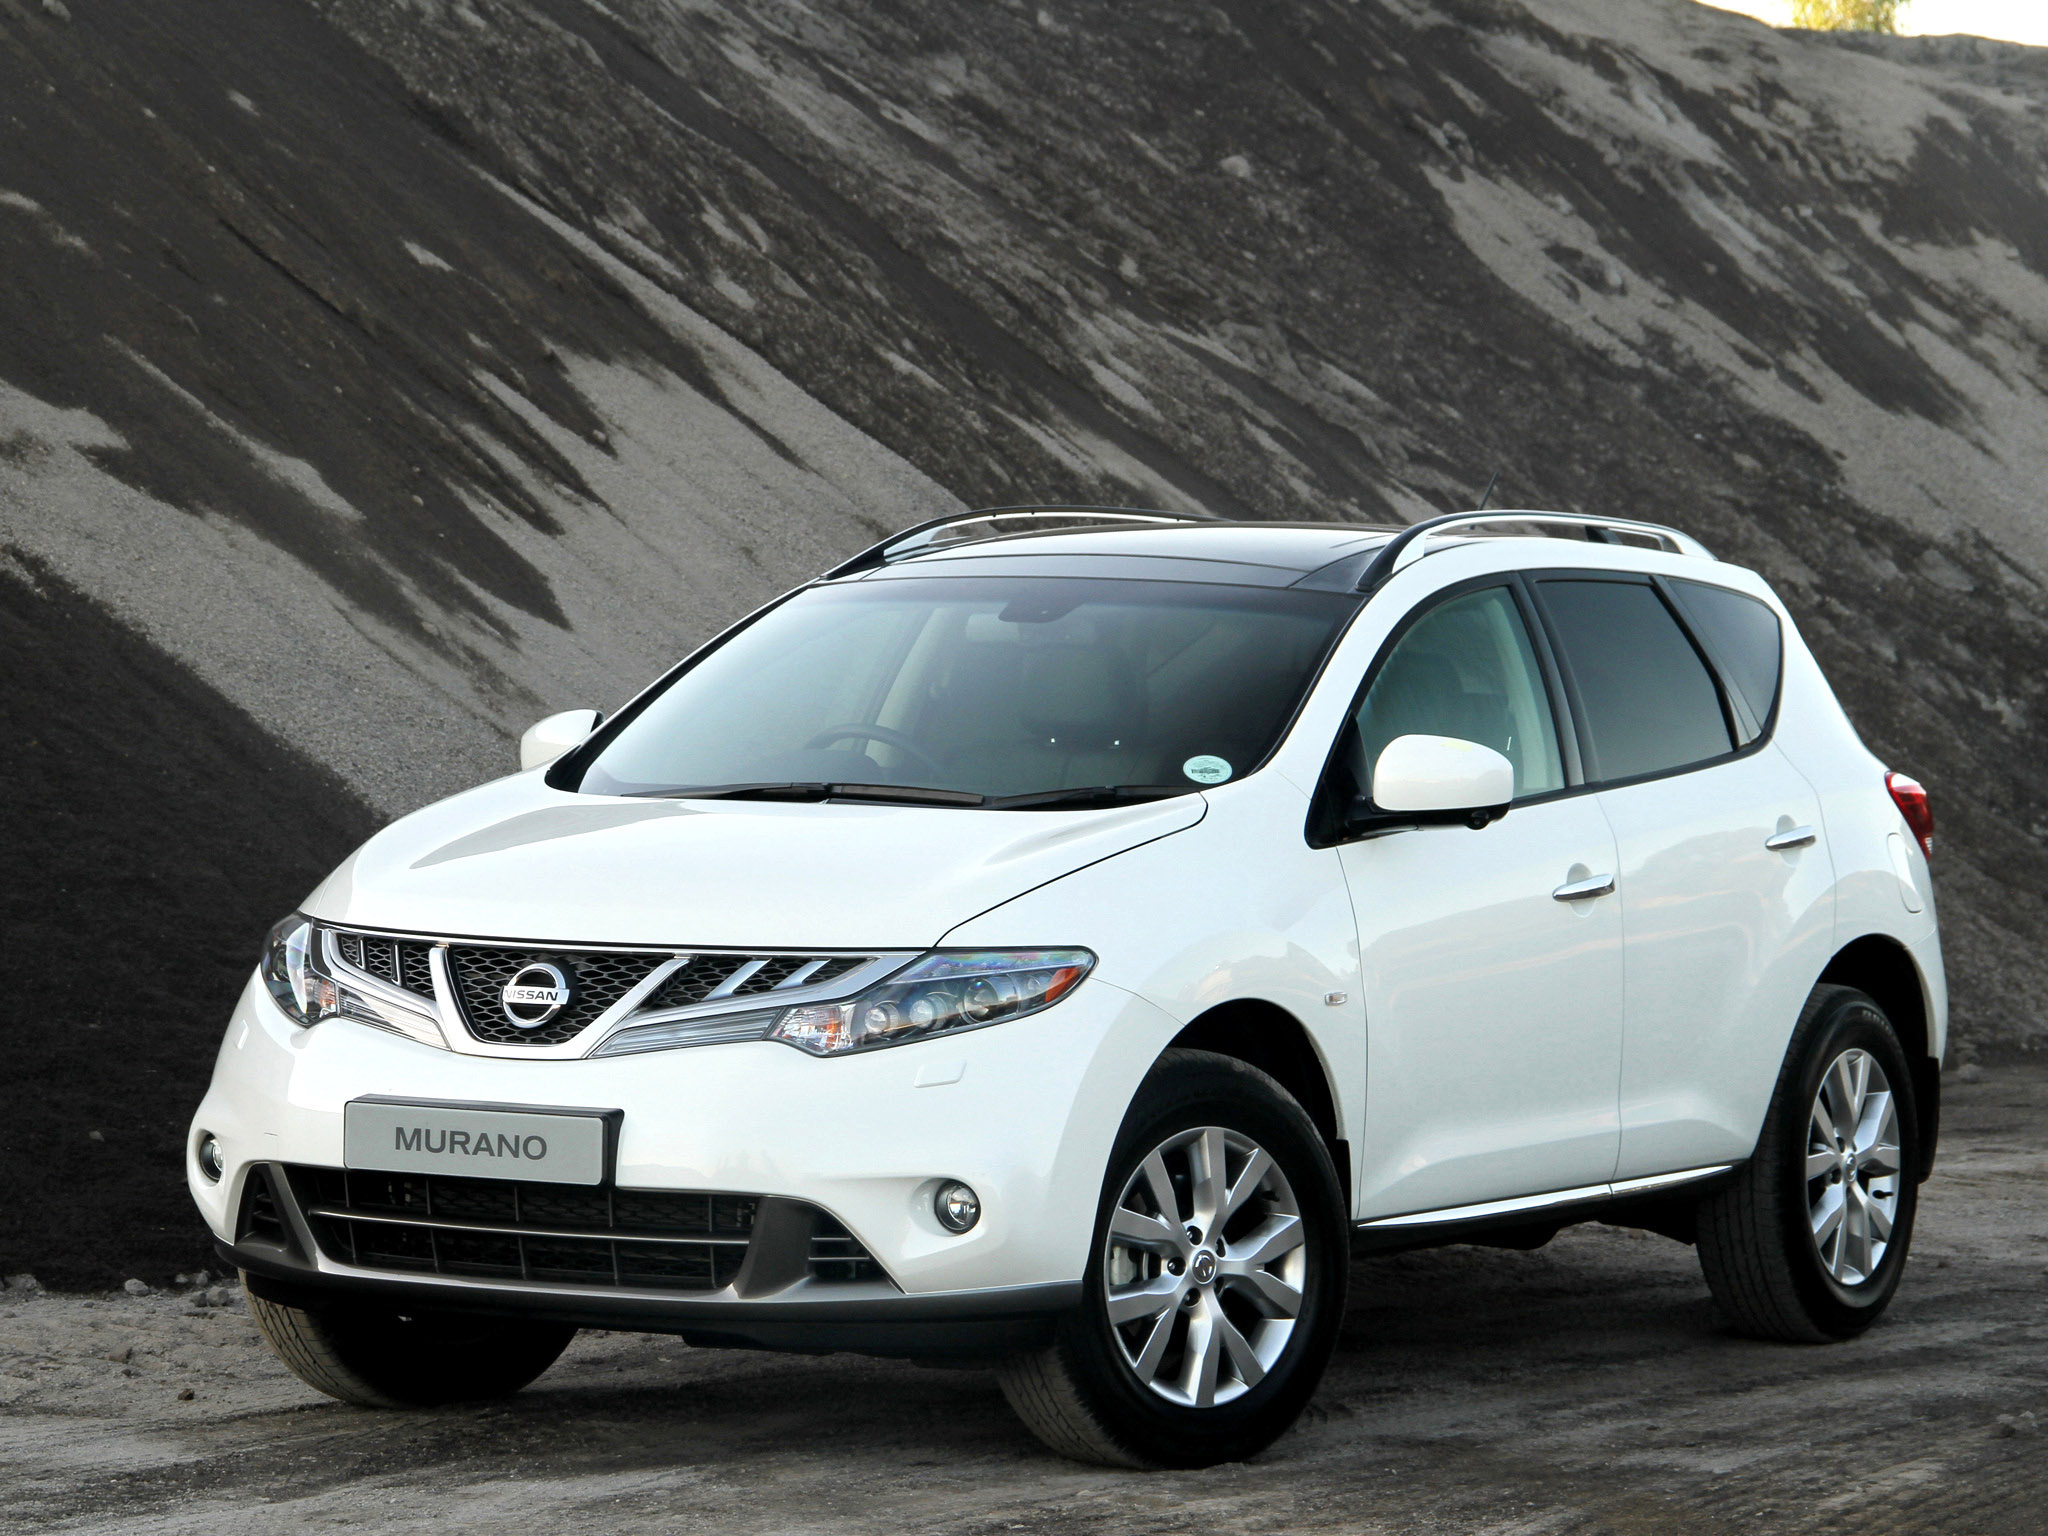 Nissan Murano, Japanese crossover beauty, Sporty SUV, High-quality images, 2050x1540 HD Desktop